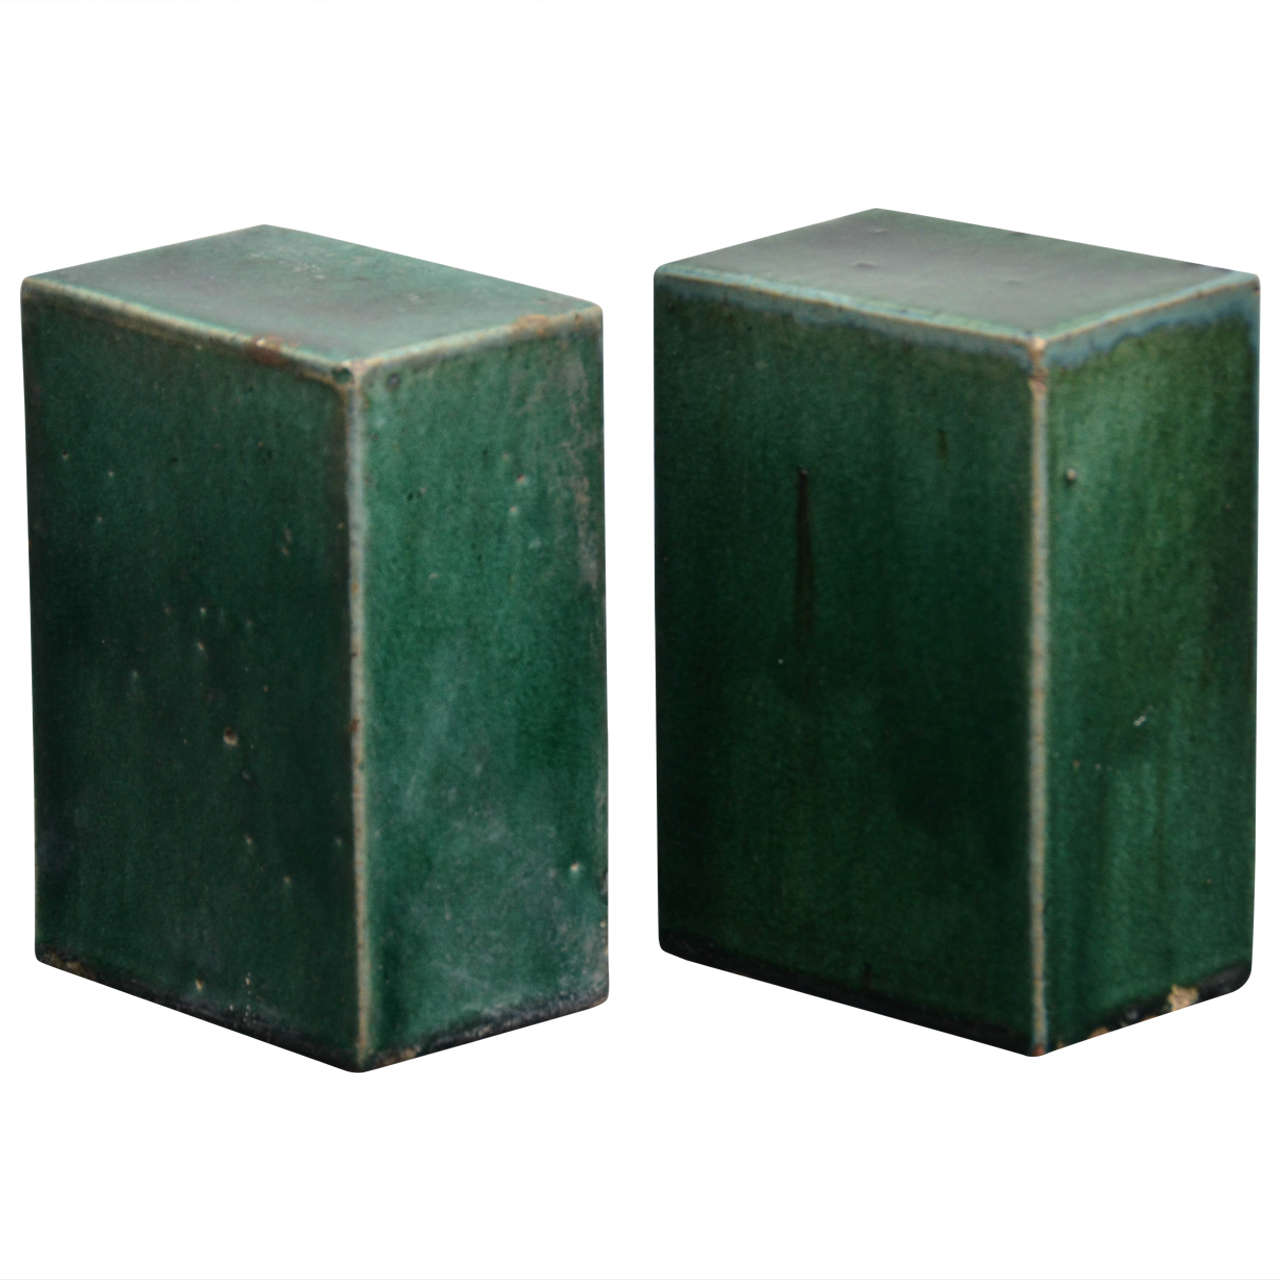 Pair of Emerald Green Glazed Ceramic Objects